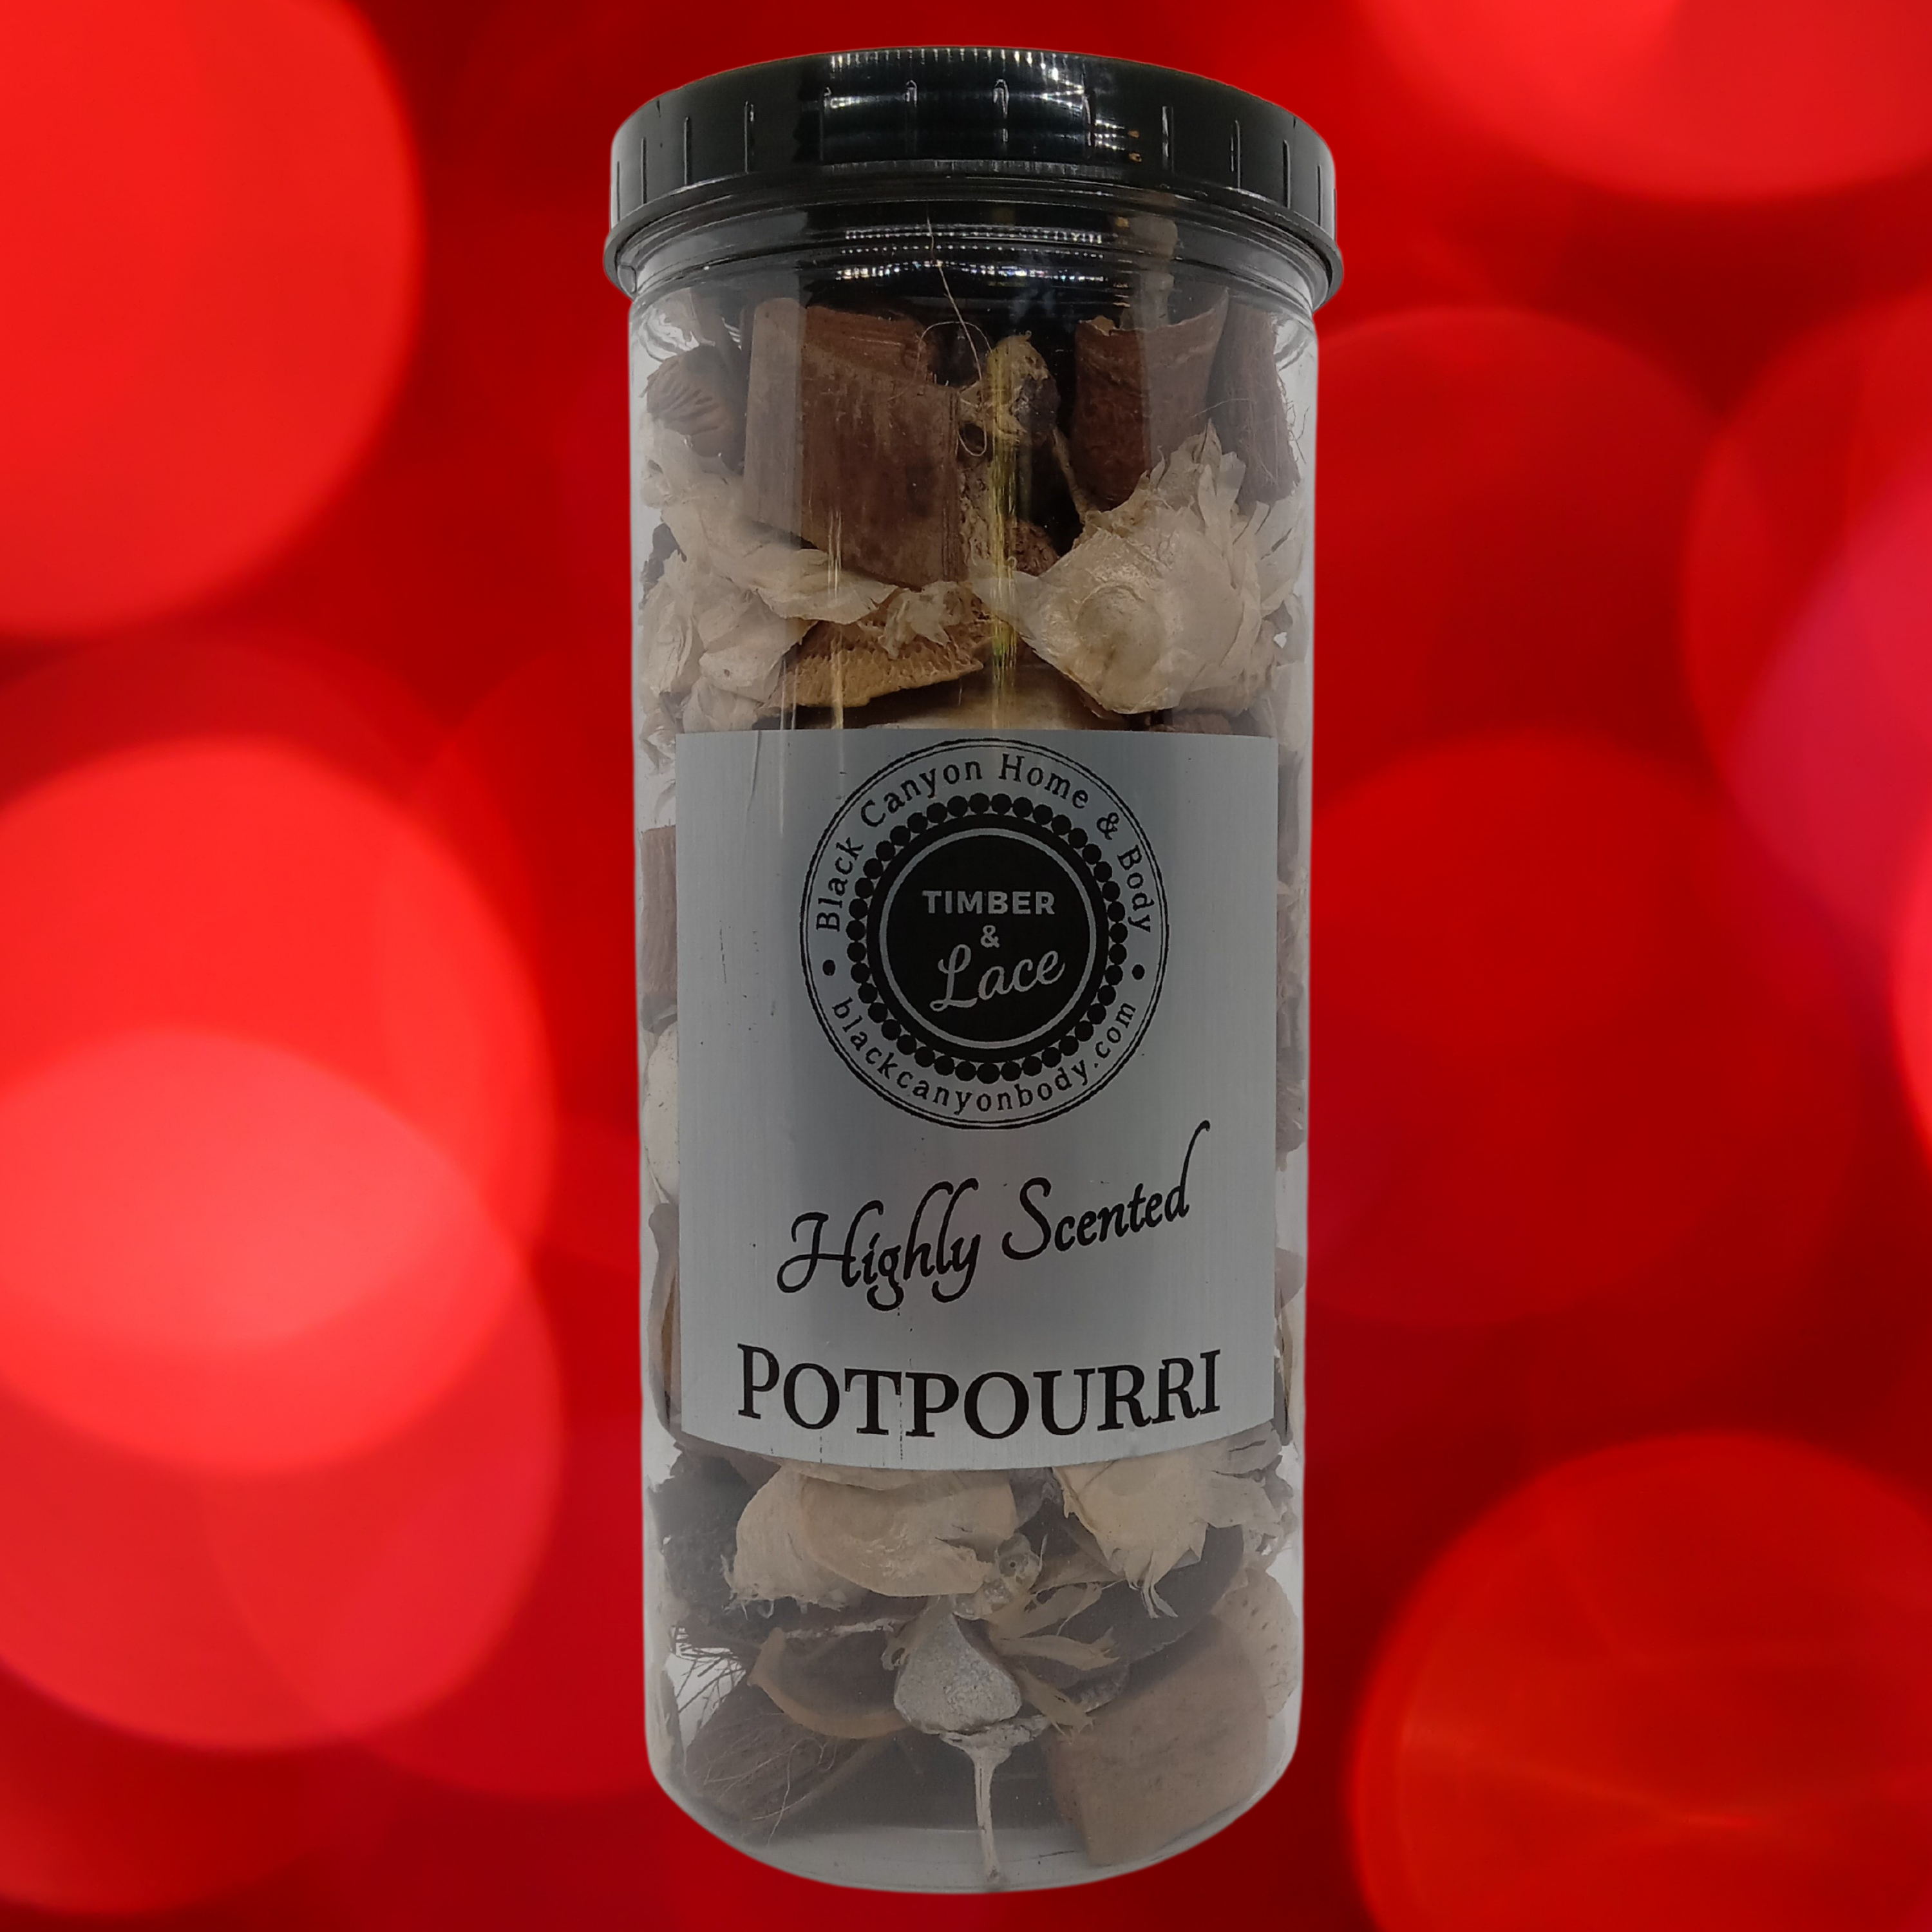 Timber & Lace Spiced Vanilla Scented Potpourri